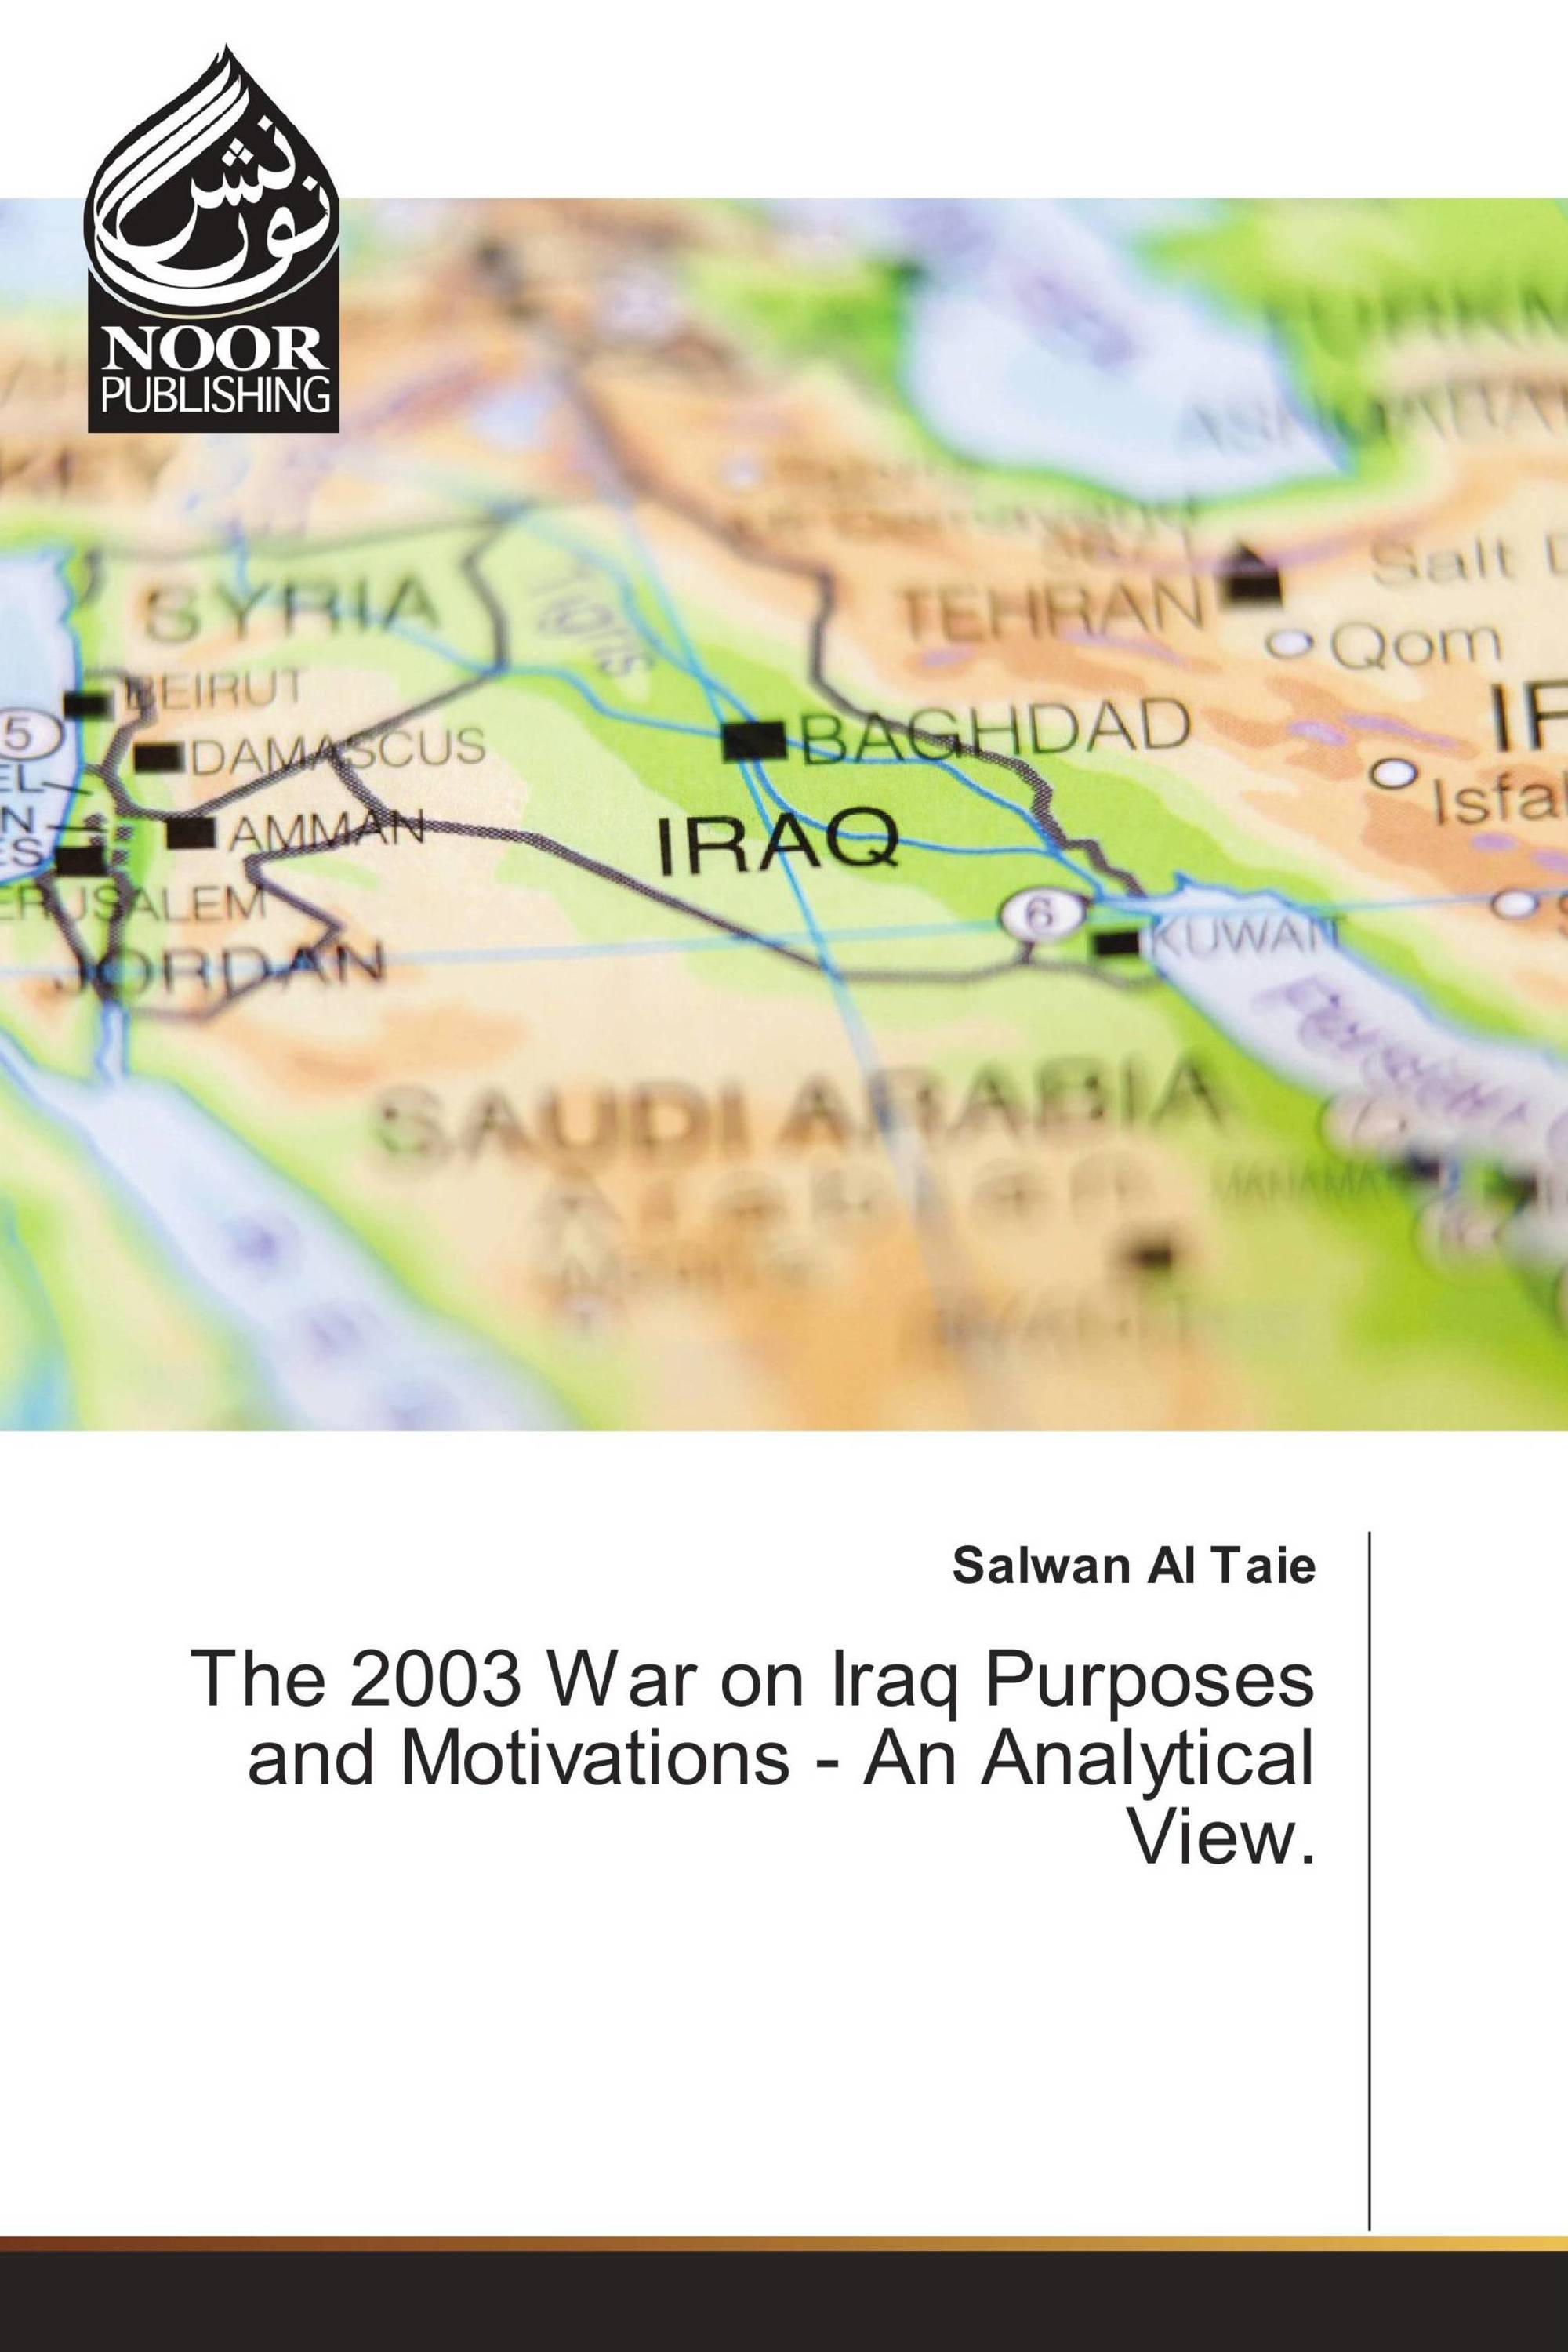 The 2003 War on Iraq Purposes and Motivations - An Analytical View.